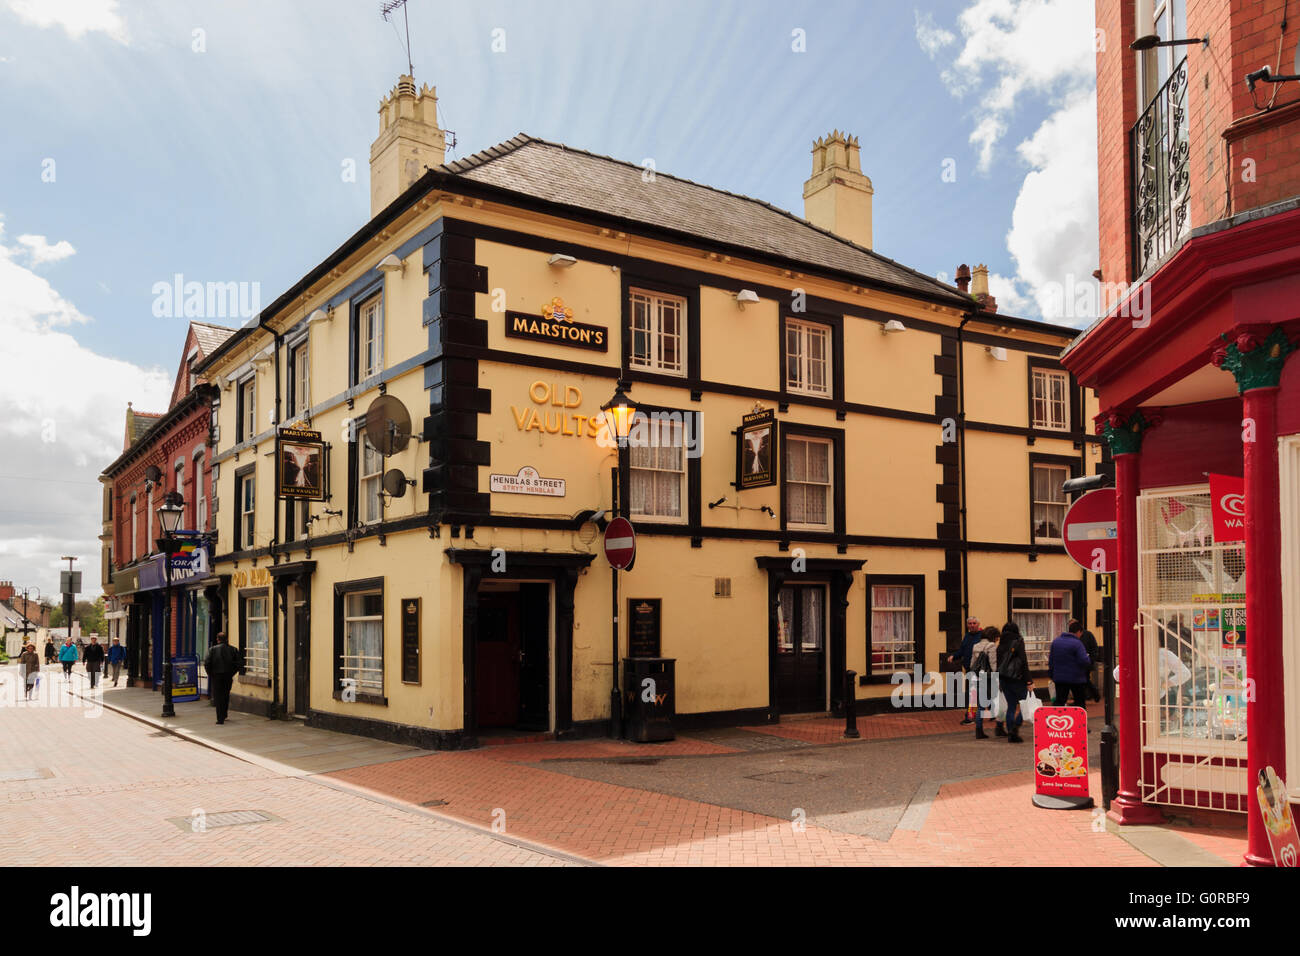 Old Vaults Pub in Chester Street Wrexham town centre established in 1868 Stock Photo